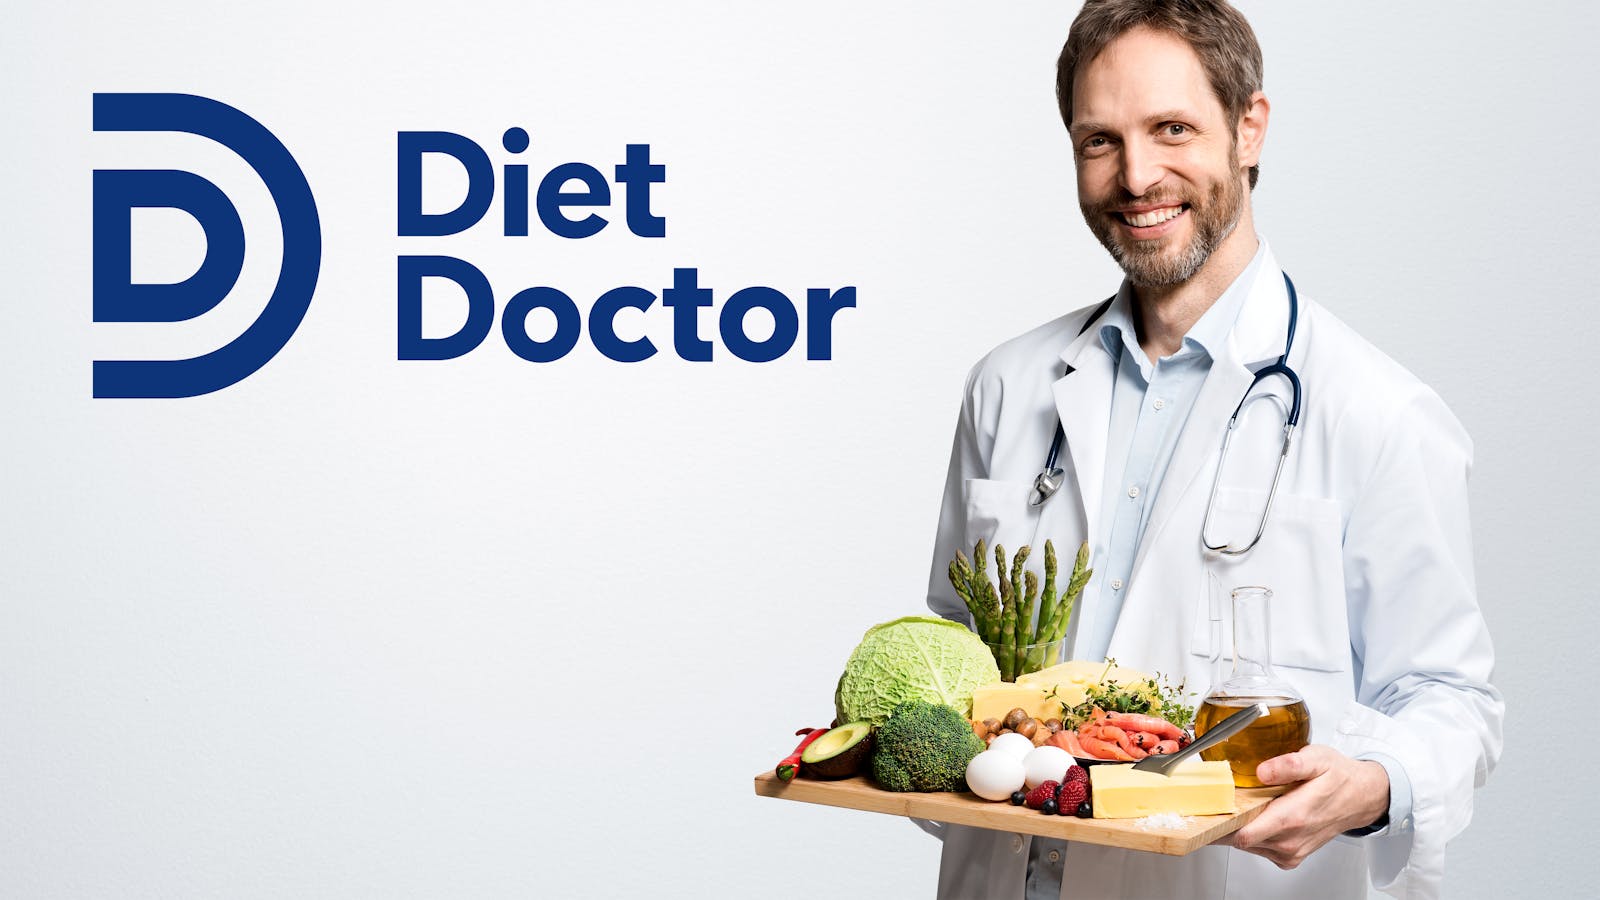 Diet Doctor — Making Low Carb and Keto Simple